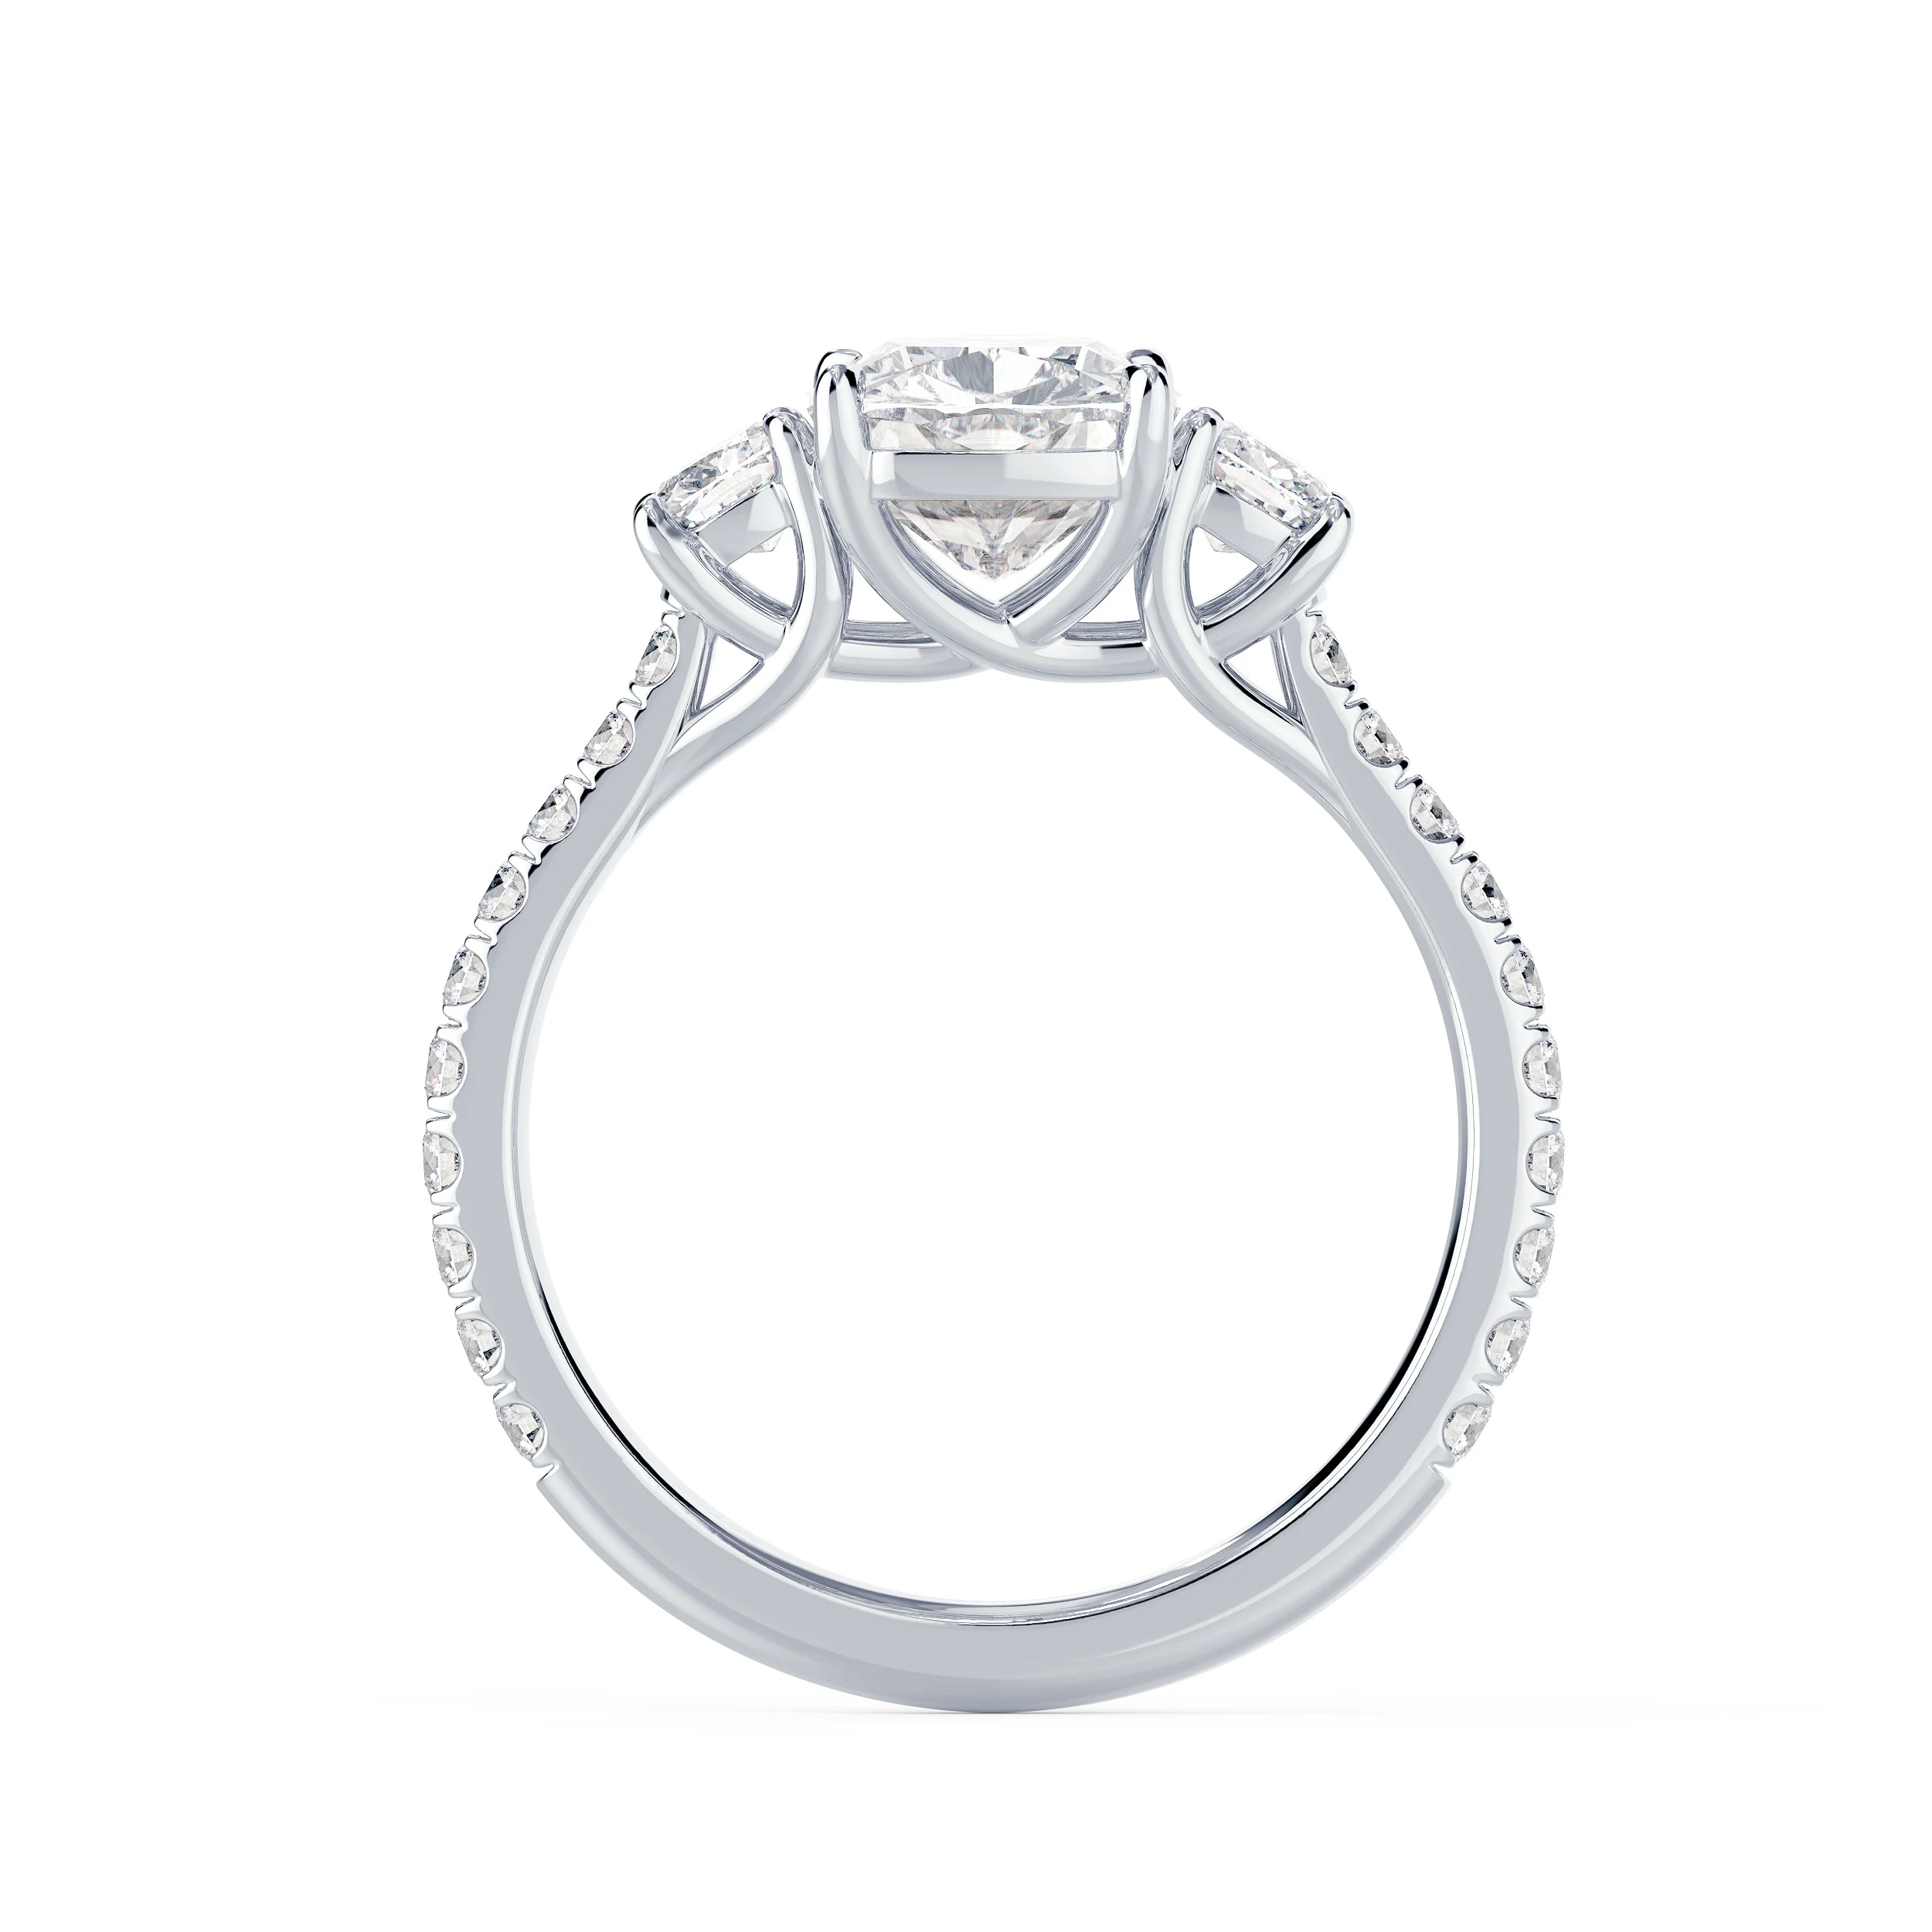 White Gold Cushion Three Stone Pavé Setting featuring Hand Selected 2.0 Carat Lab Diamonds (Profile View)